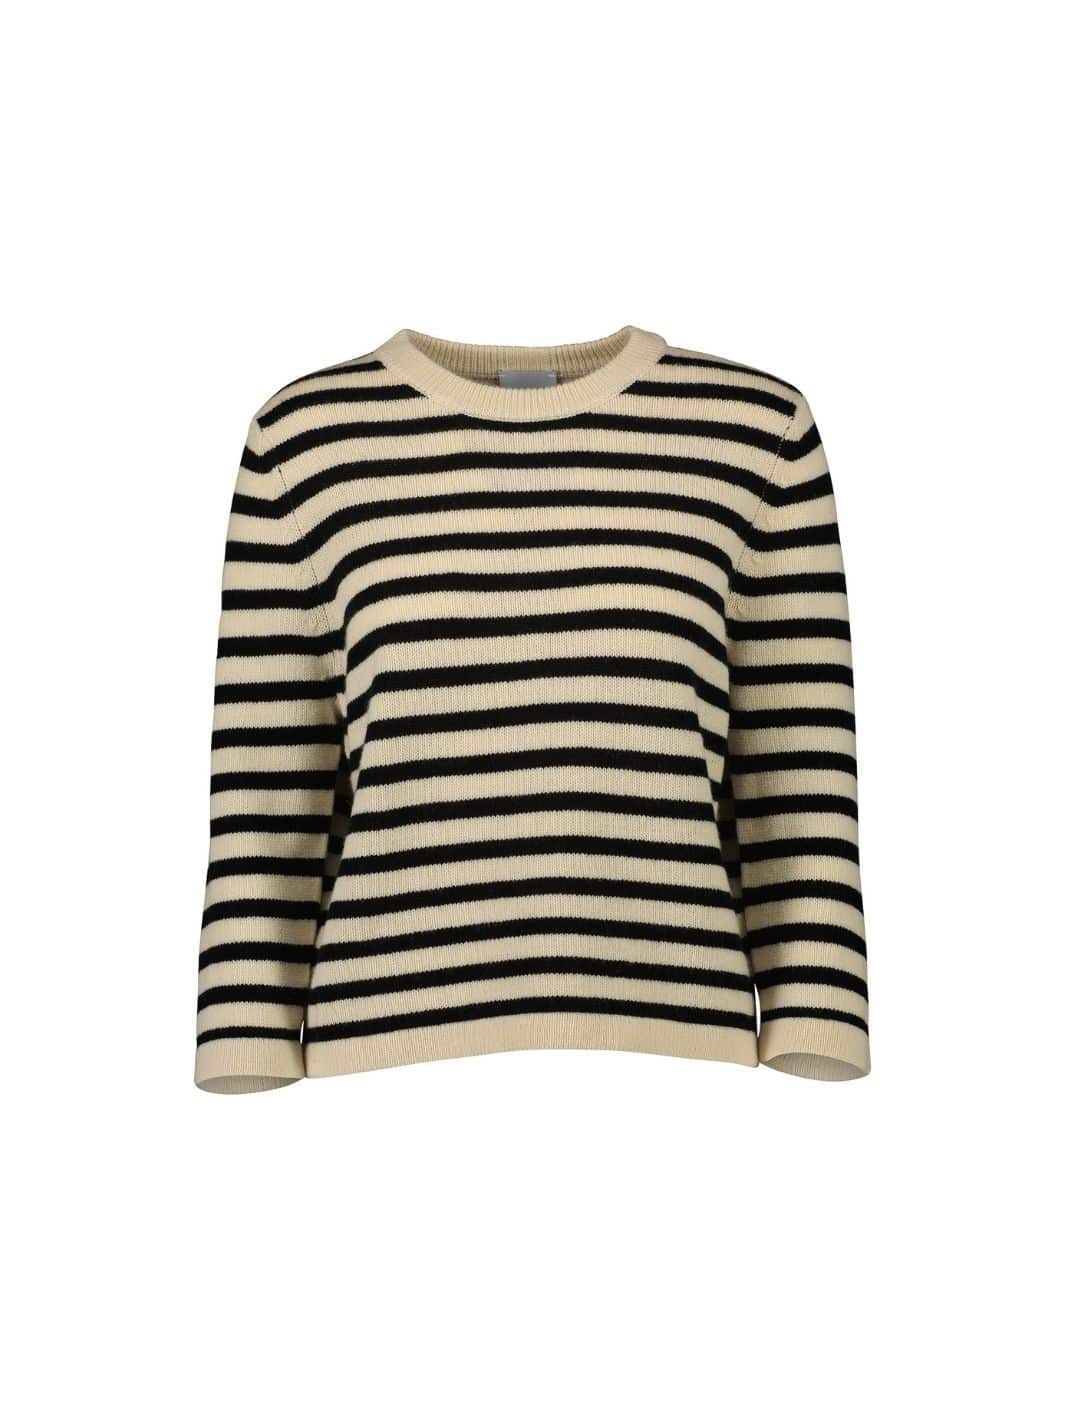 Allude Knit Genser | 3/4 RD-Sweater Navy/Cream Stripes